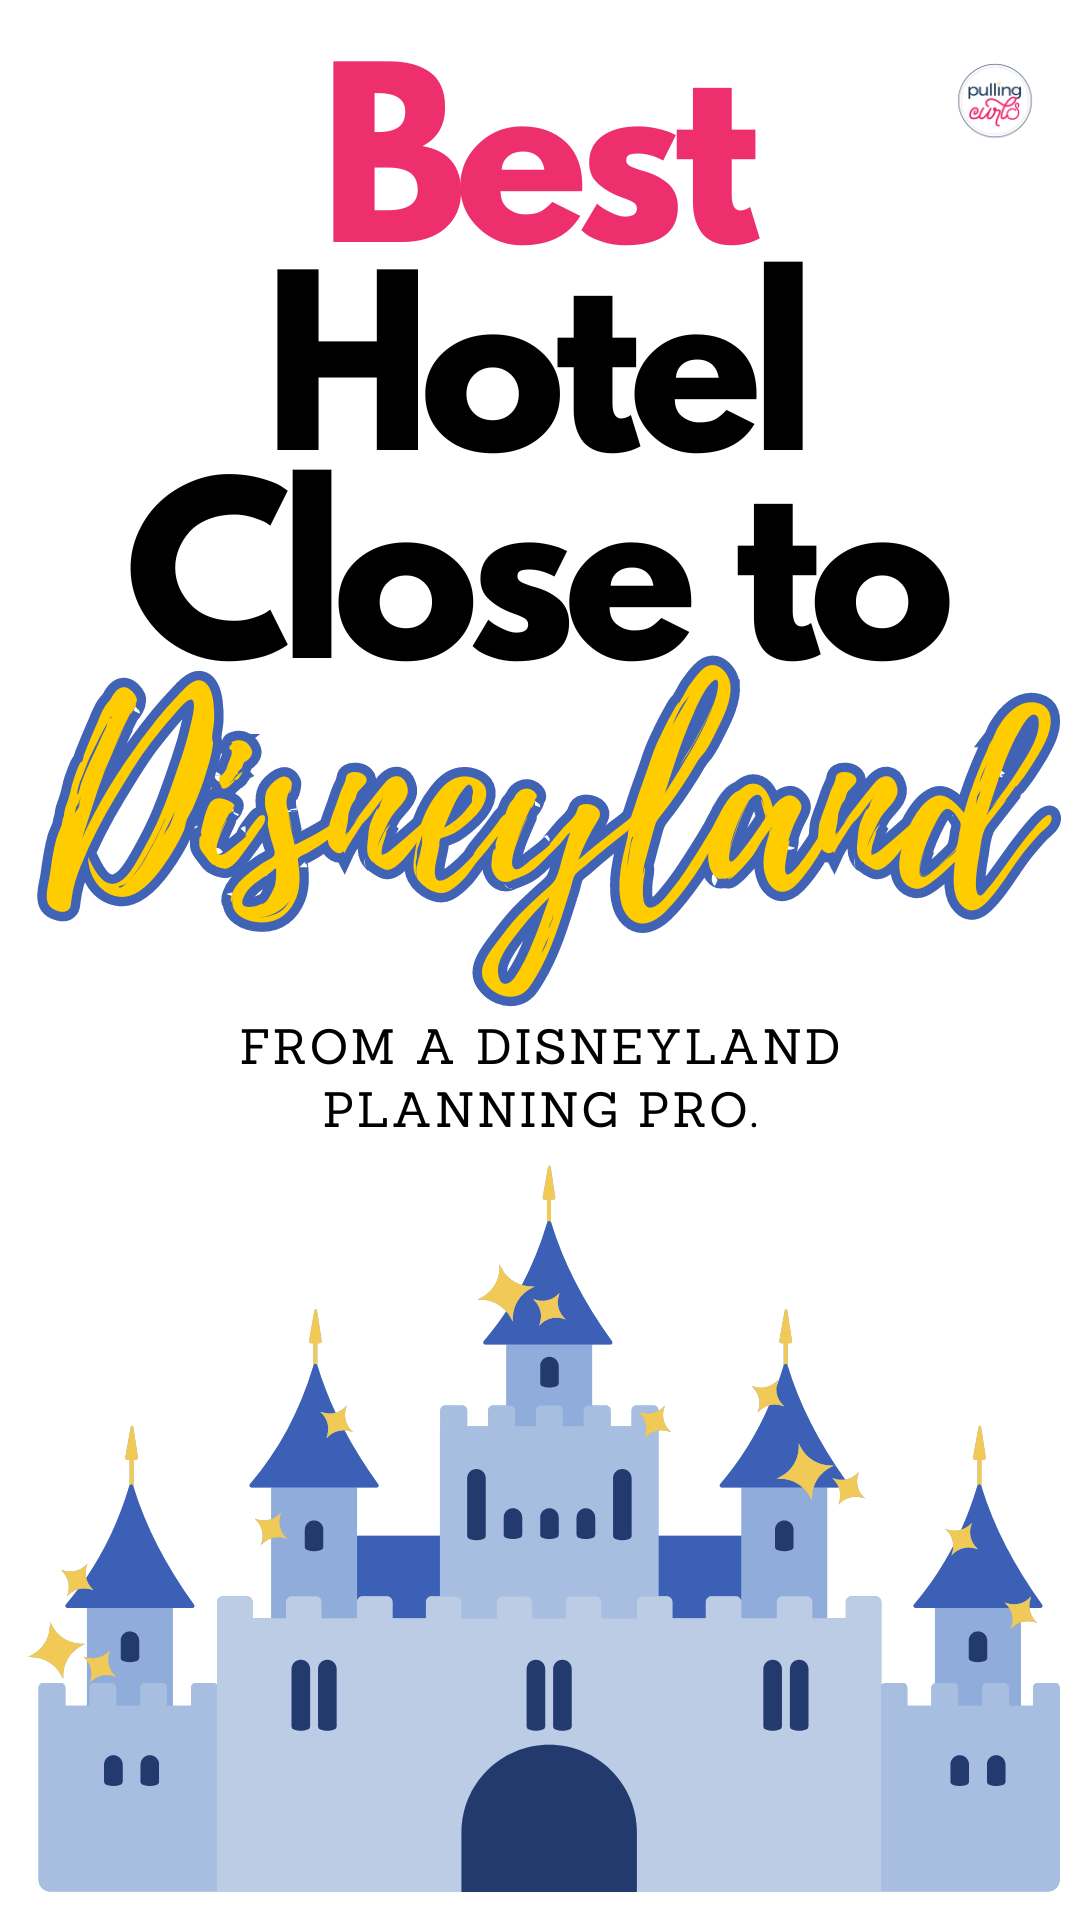 Get the scoop from a Disneyland planning pro. Discover the top five hotels near Disneyland balancing budget and quality. Unlock the secrets of your best stay ever! via @pullingcurls